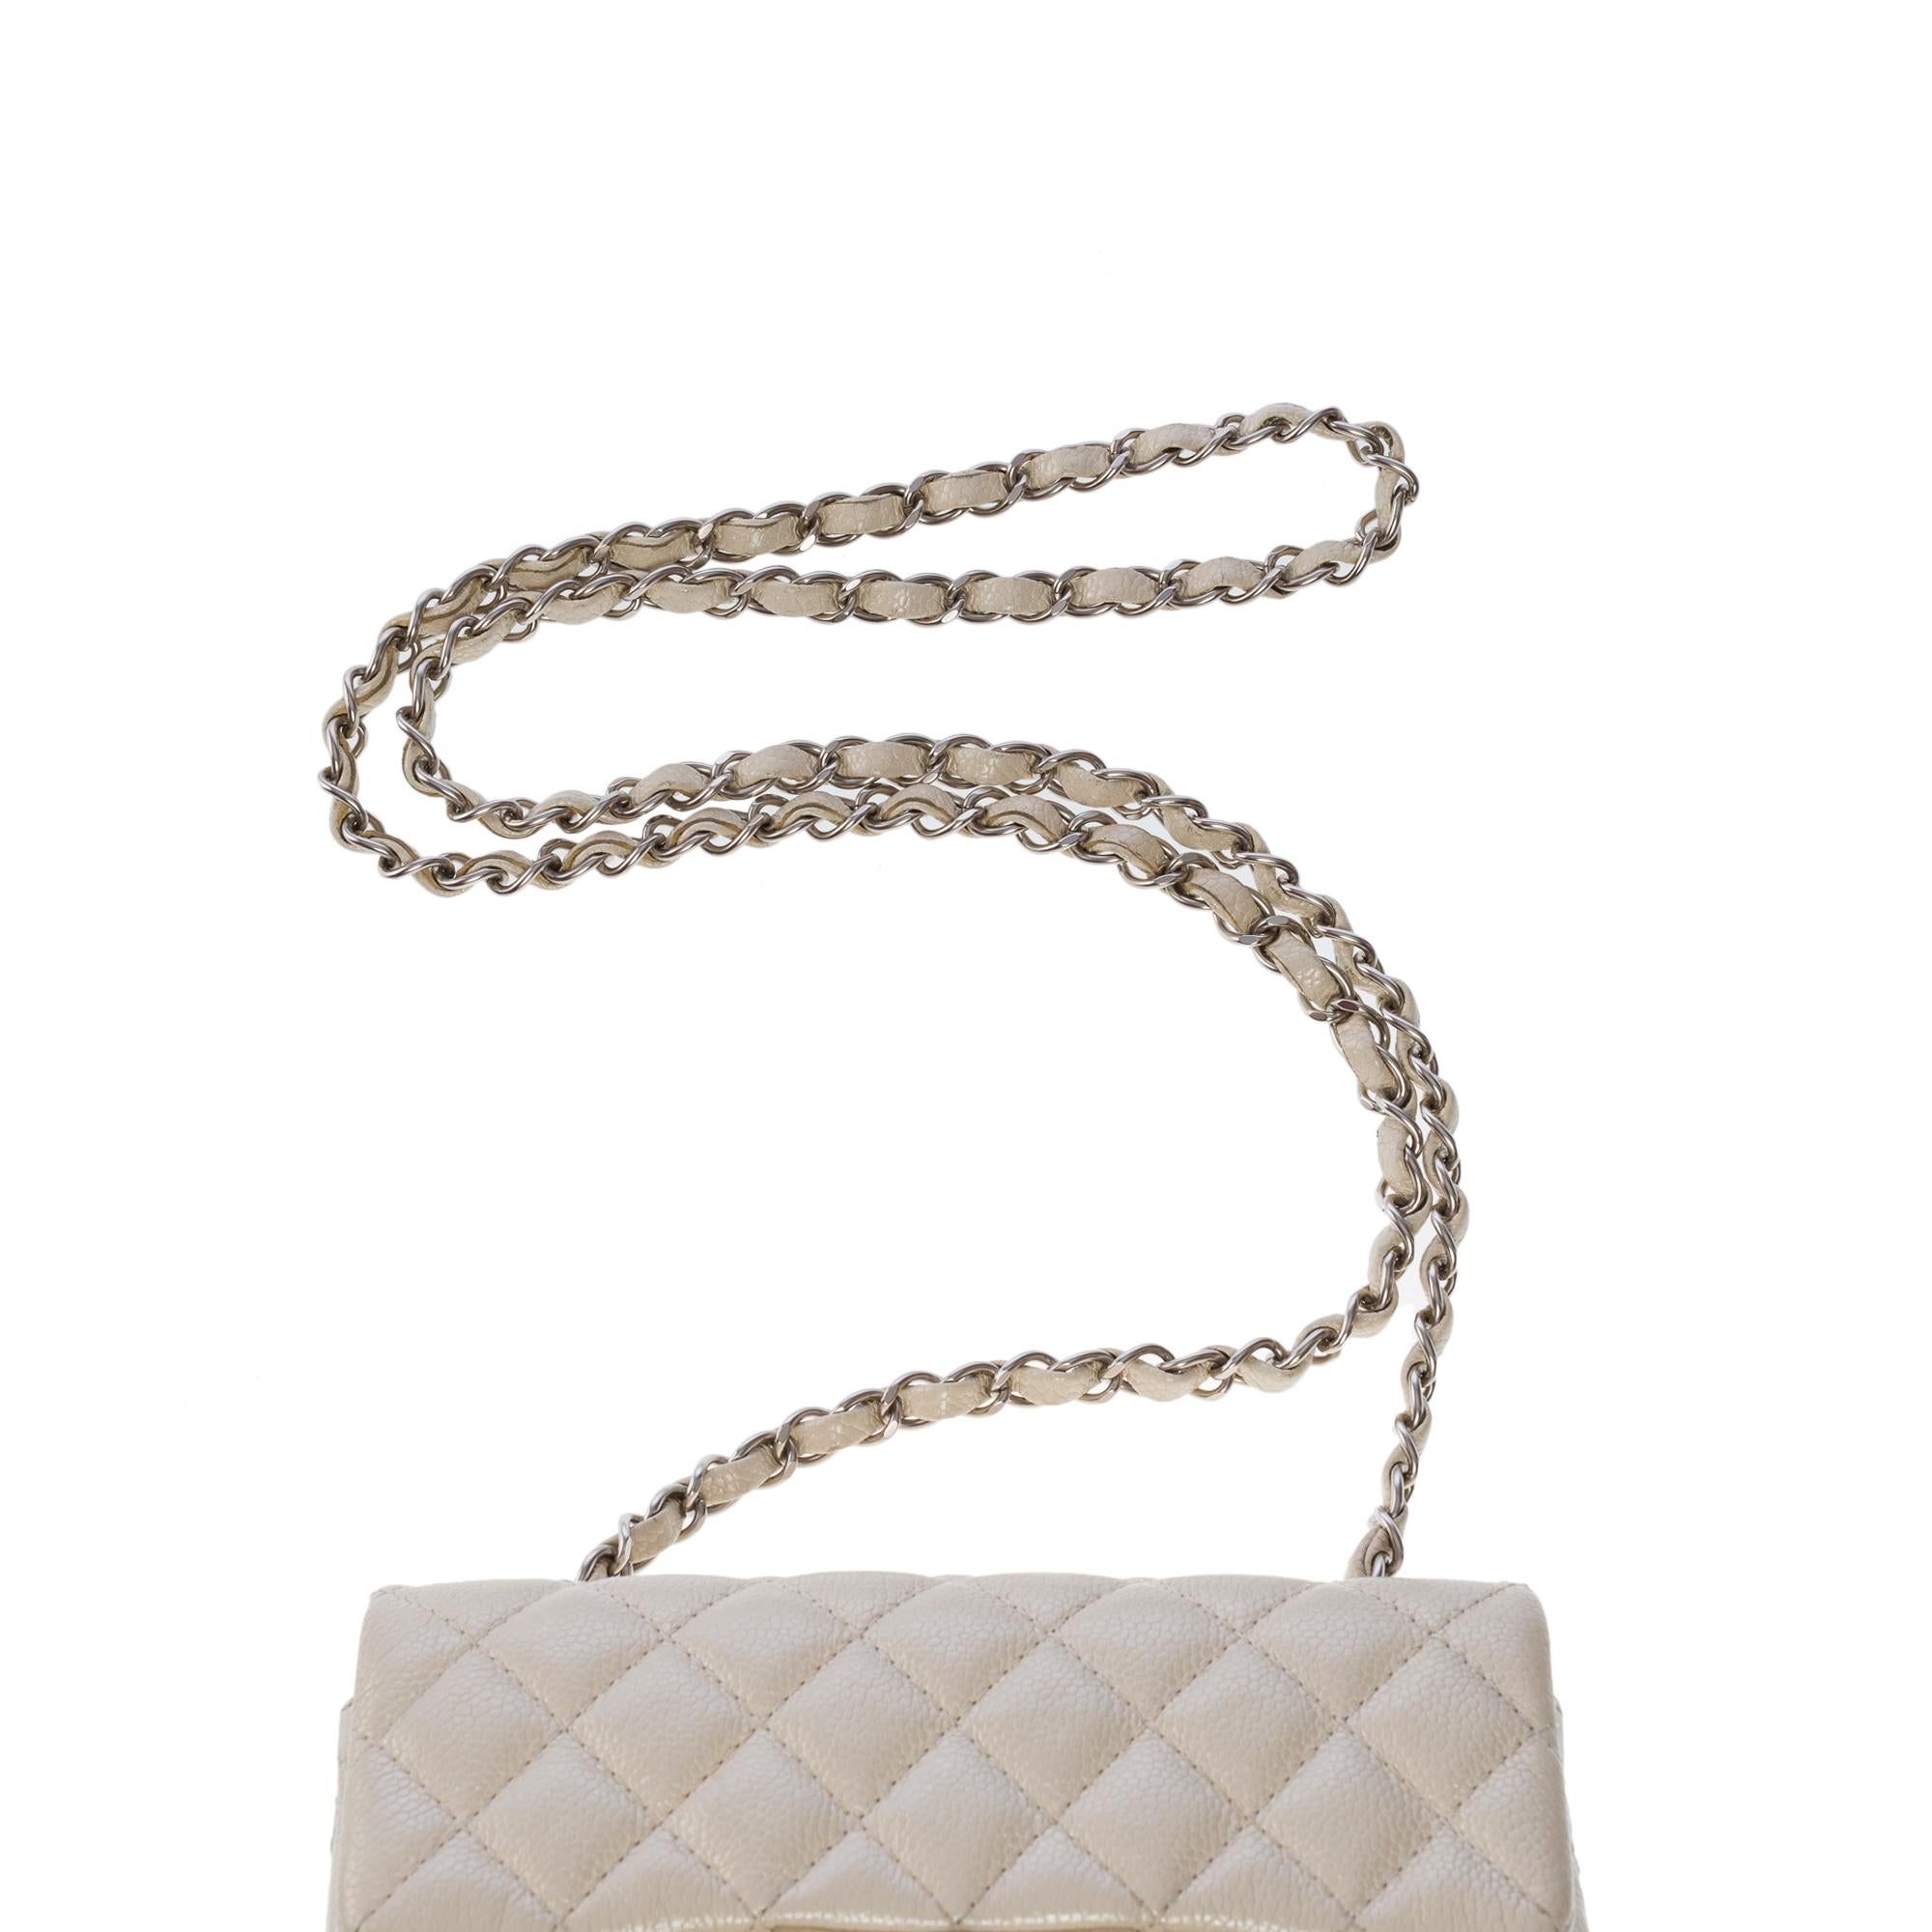 Splendid Chanel Timeless Mini Flap bag in off white pearl quilted leather, SHW For Sale 5